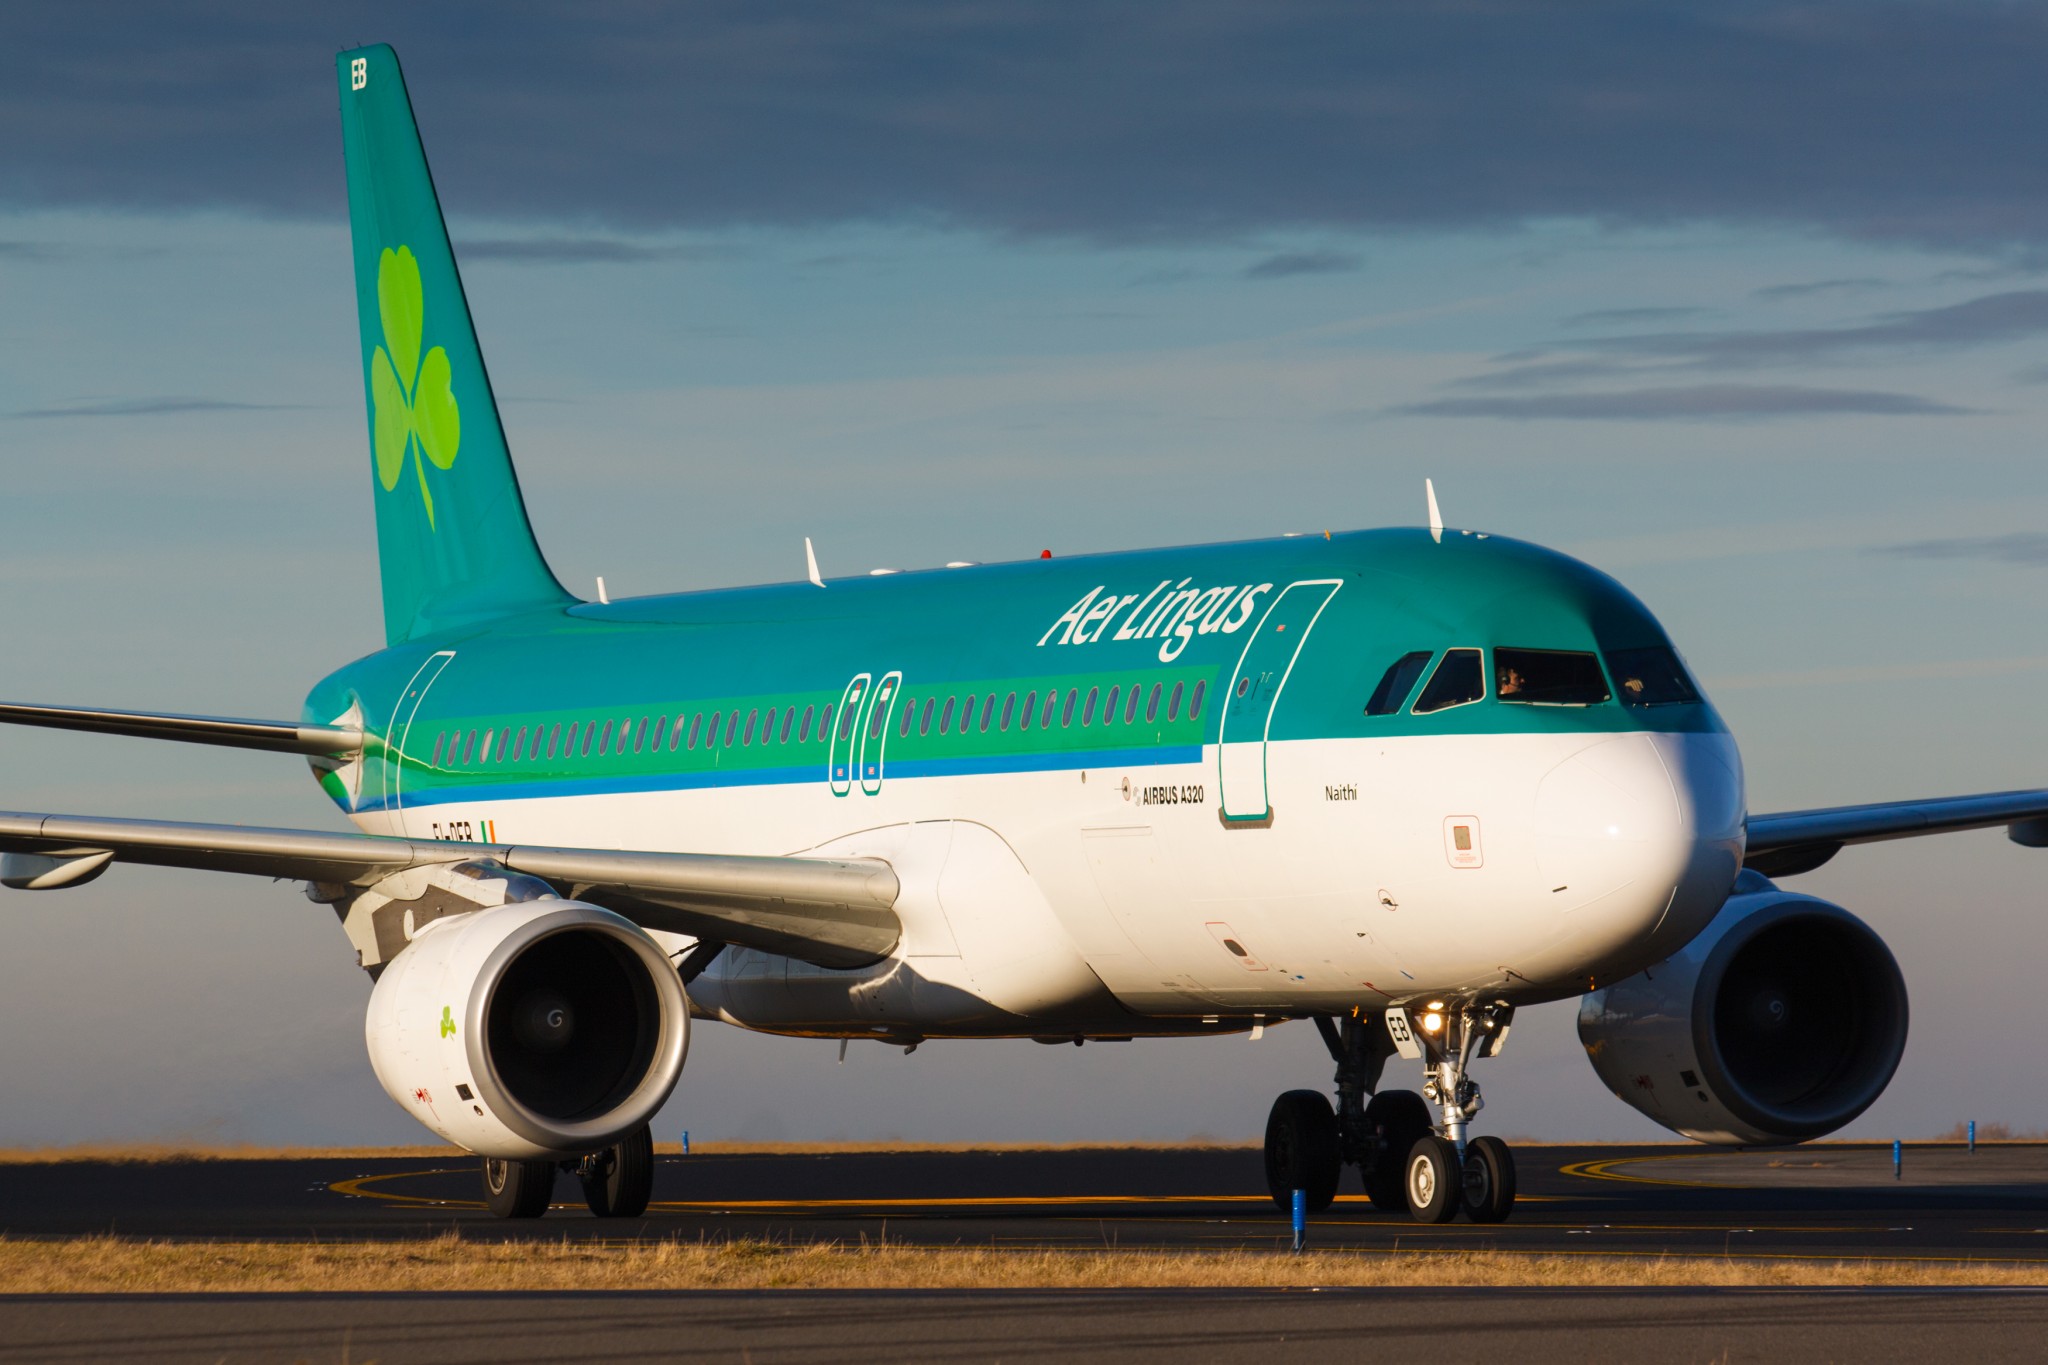 Aer Lingus begins Ireland’s first direct service to Miami